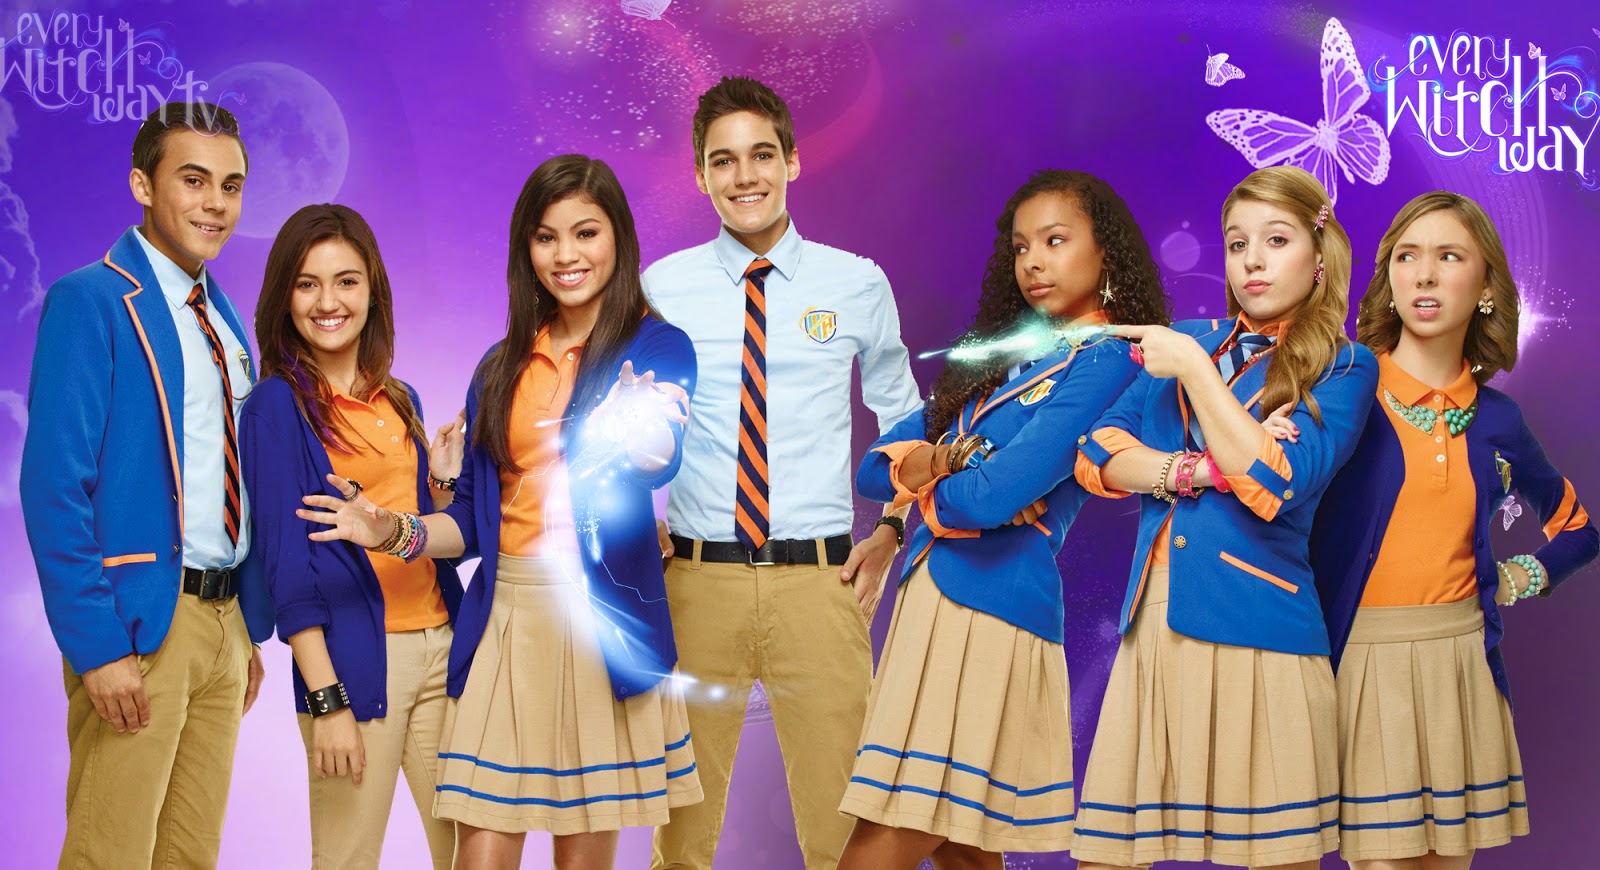 Wallpaper Of Every Witch Way